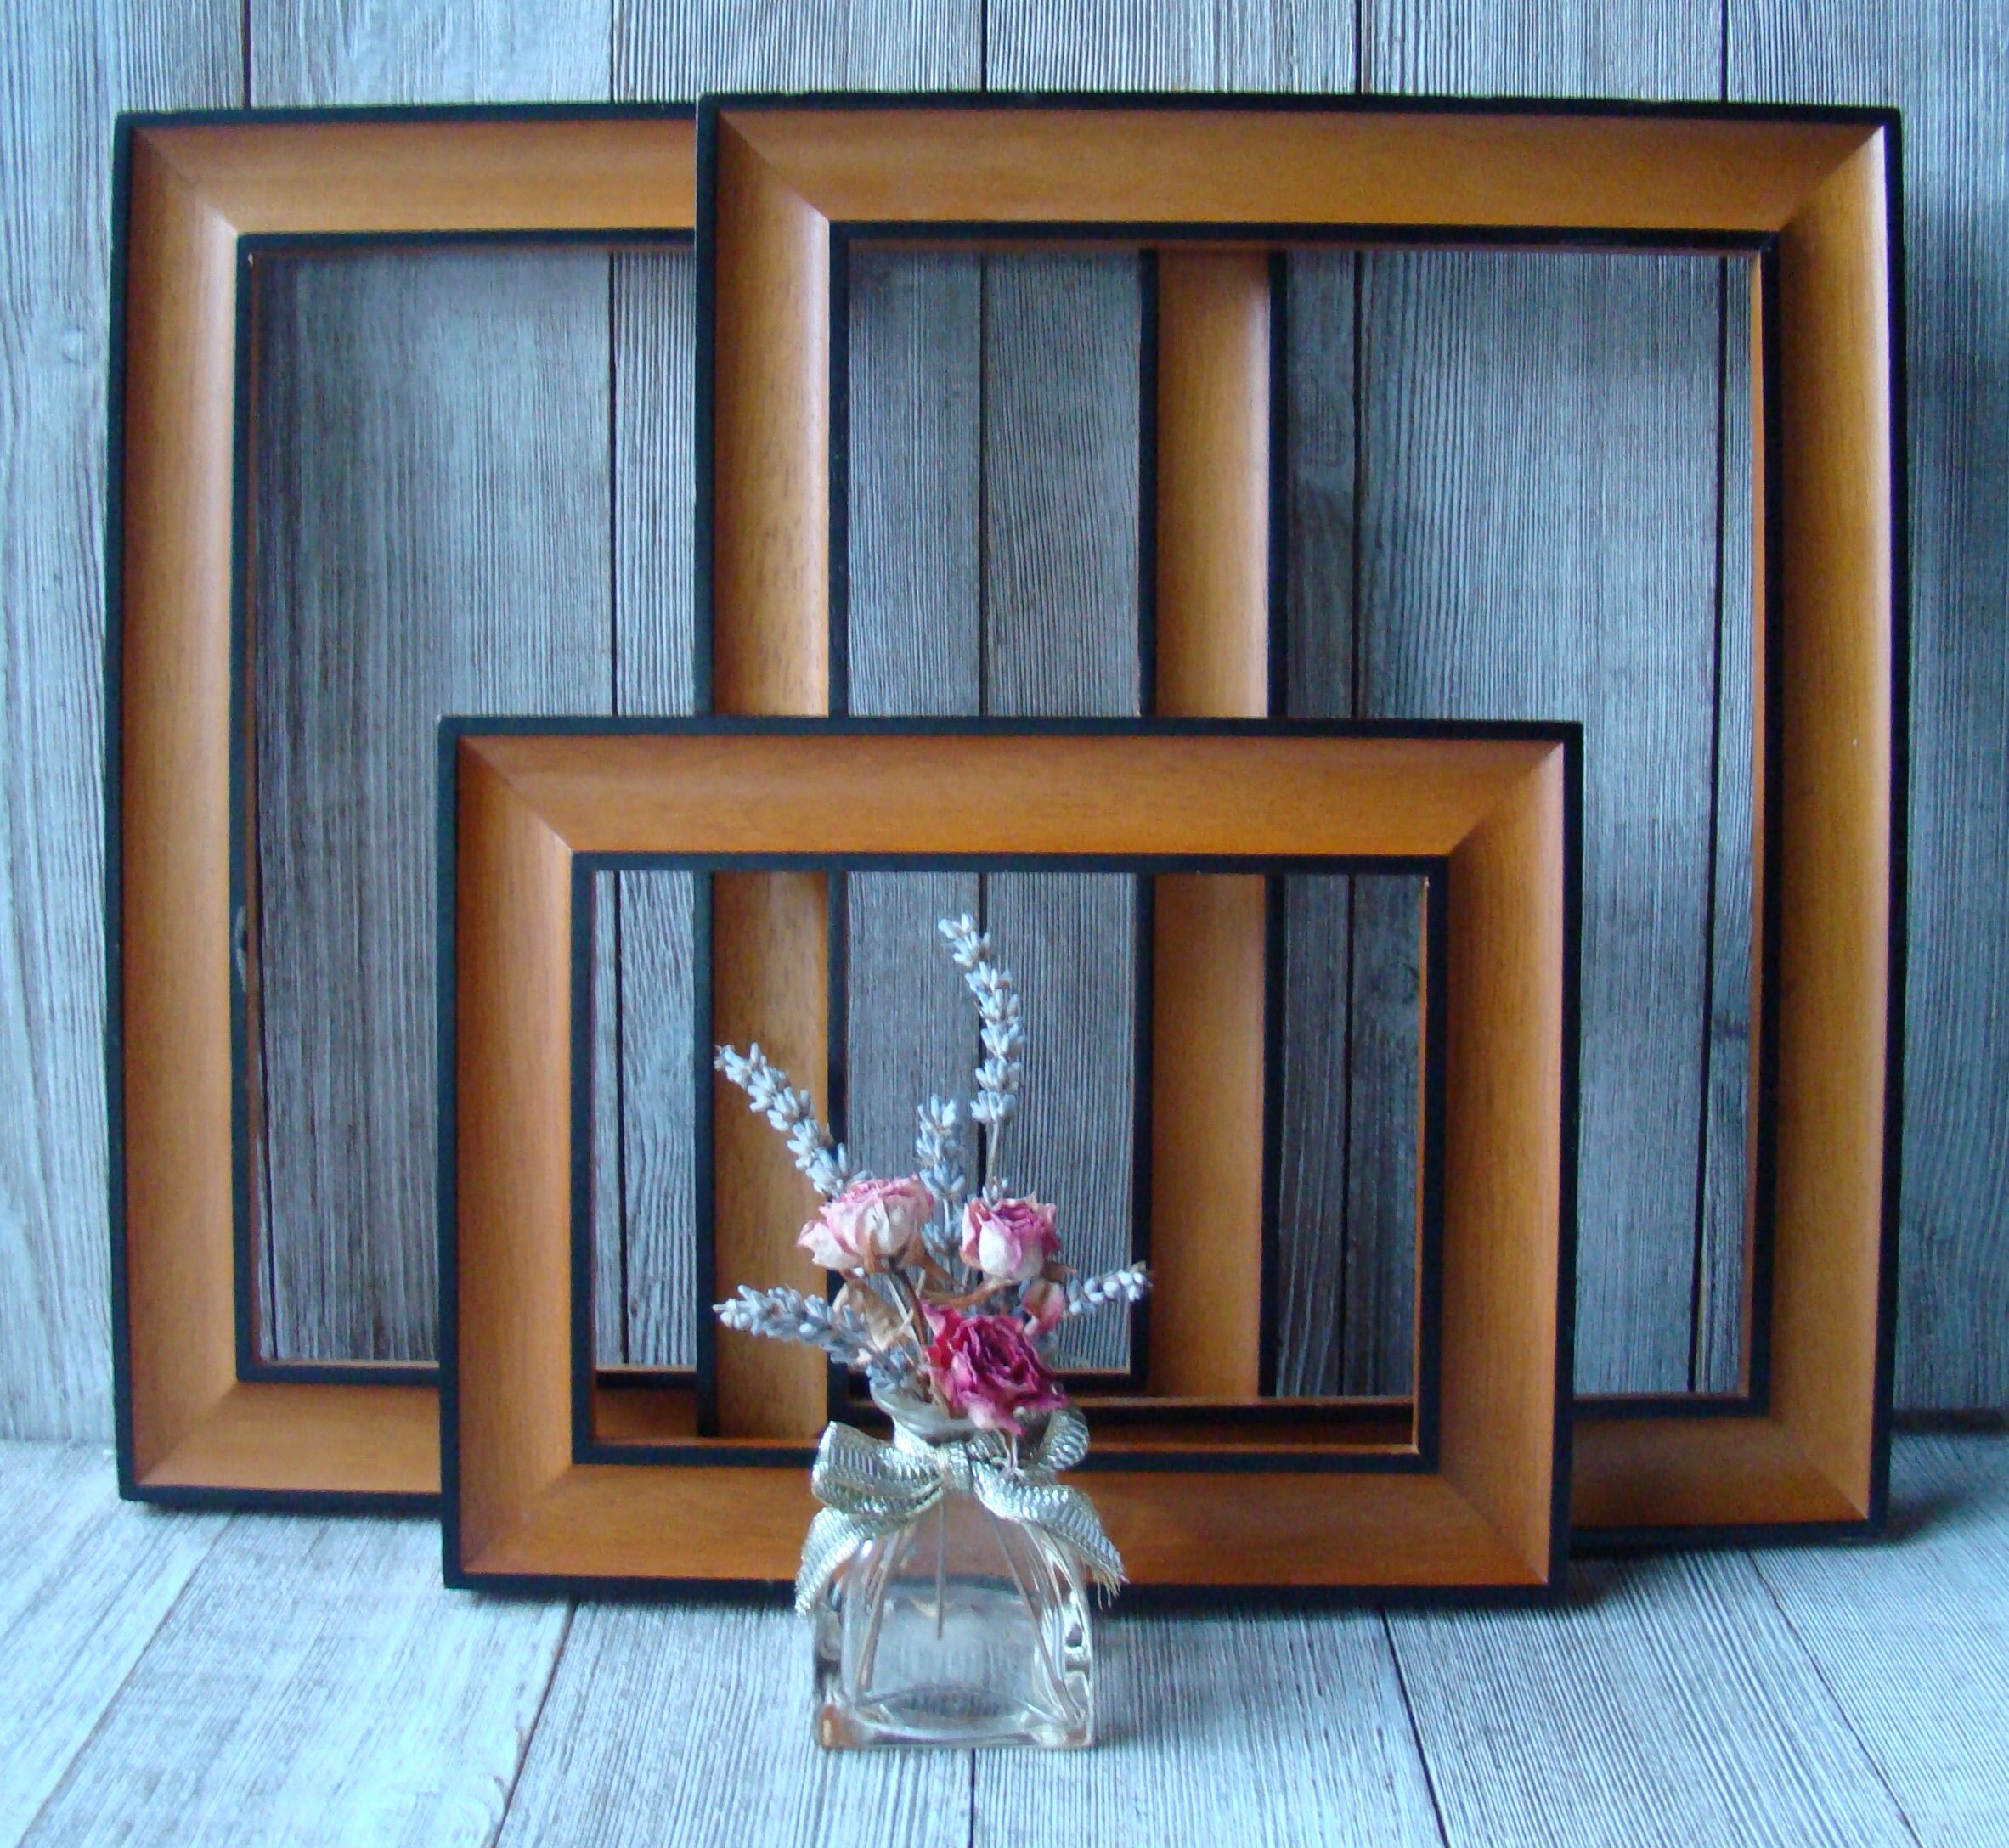 Set of 3 Reclaimed Wood 8 x 10 Picture Frames picture frames